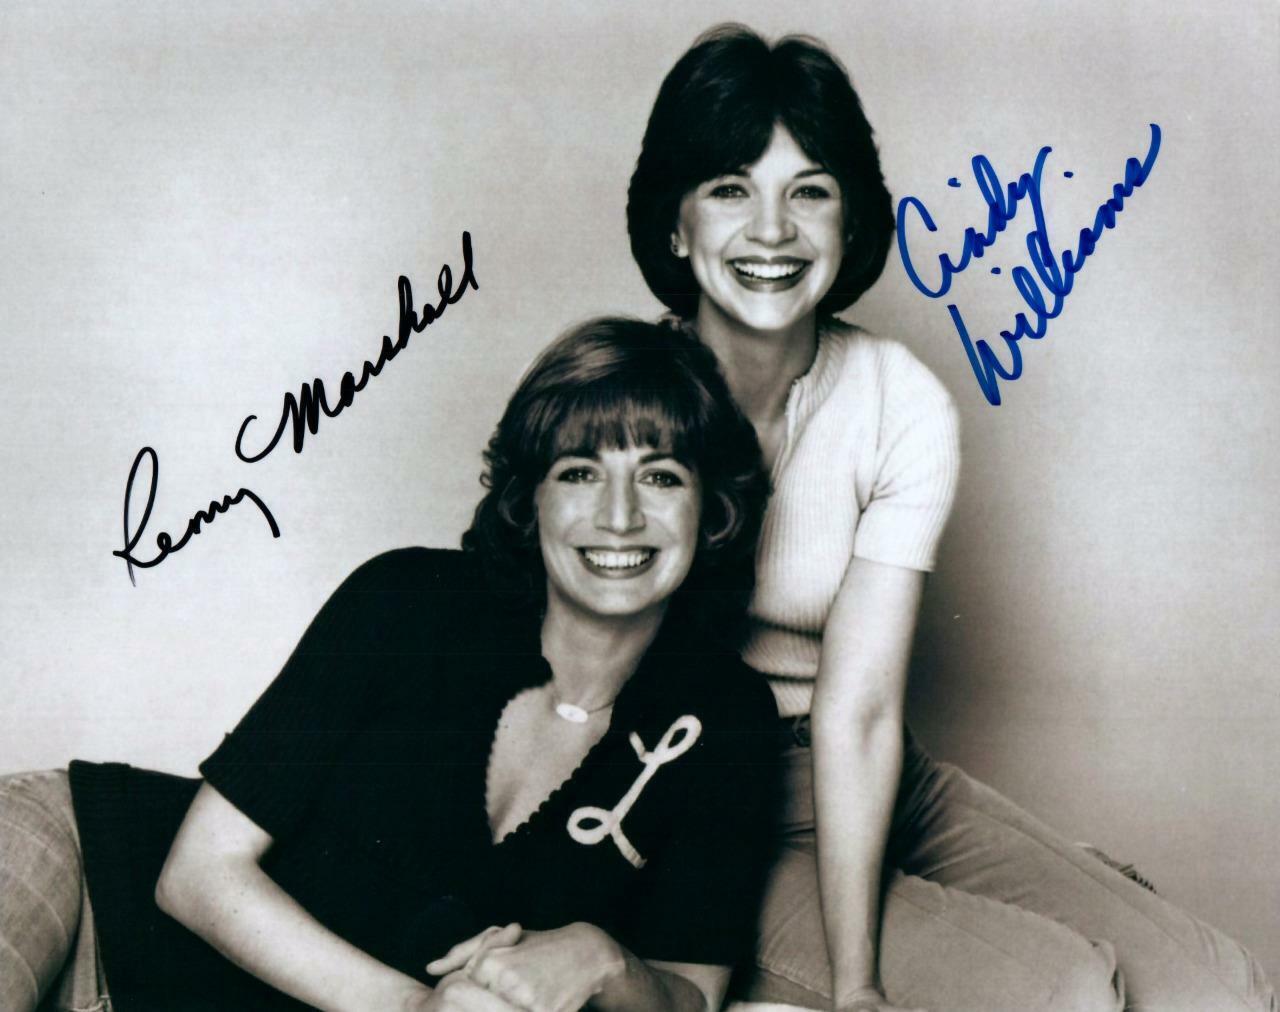 Penny Marshall Cindy Williams signed 8x10 Photo Poster painting autograph Pic autographed + COA